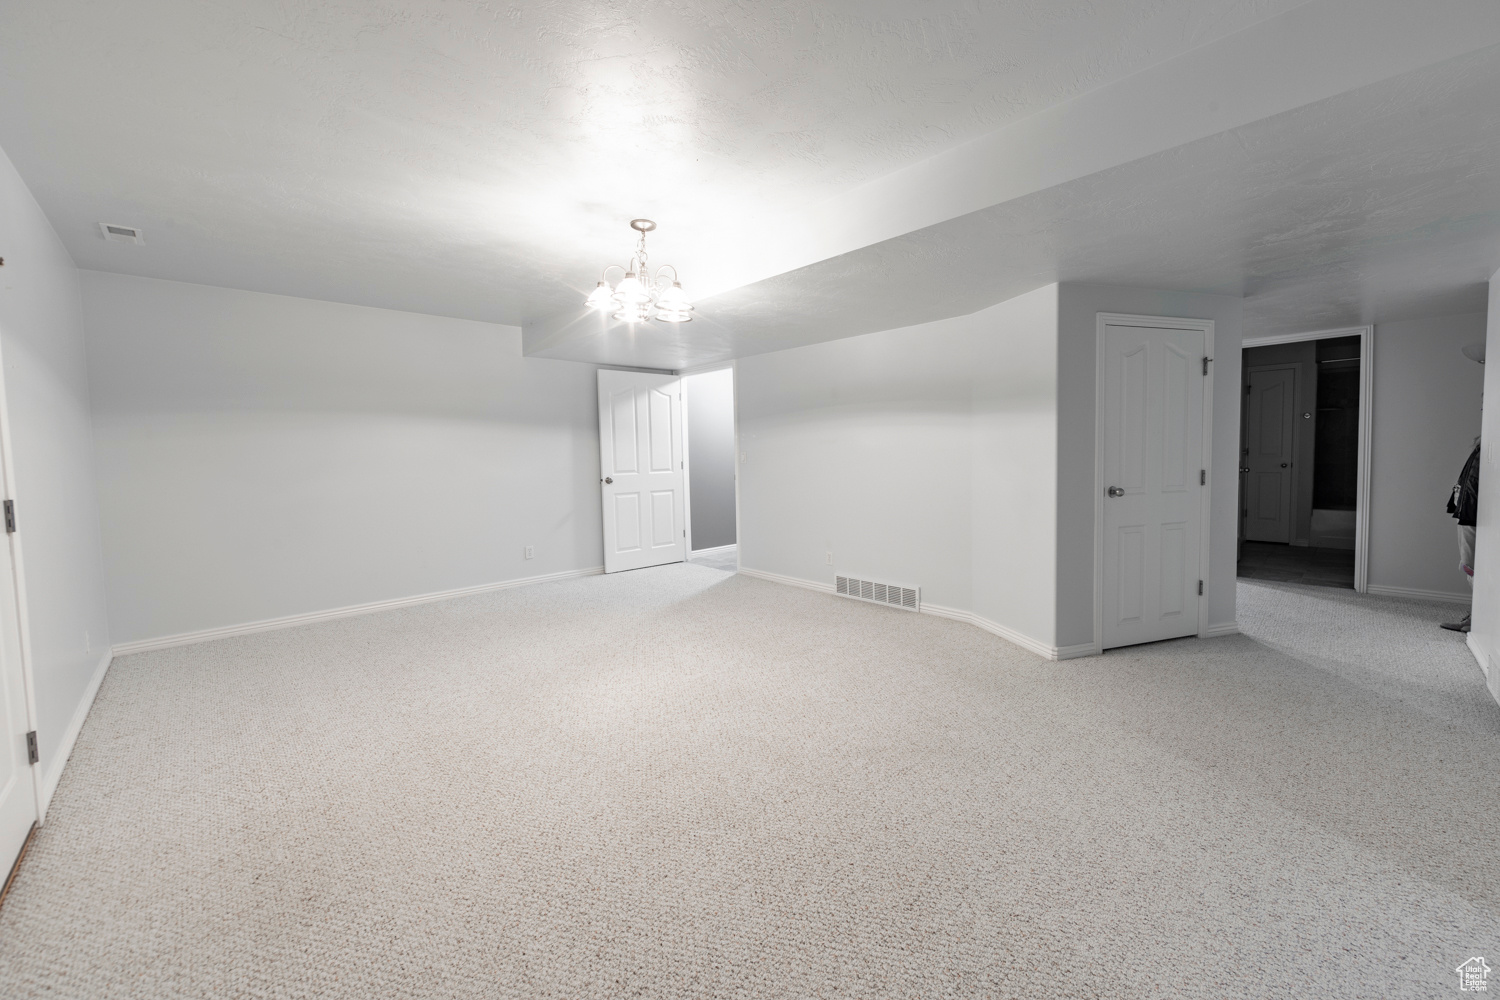 Bonus room  or Family room or Theater room Downstairs with a chandelier and carpet